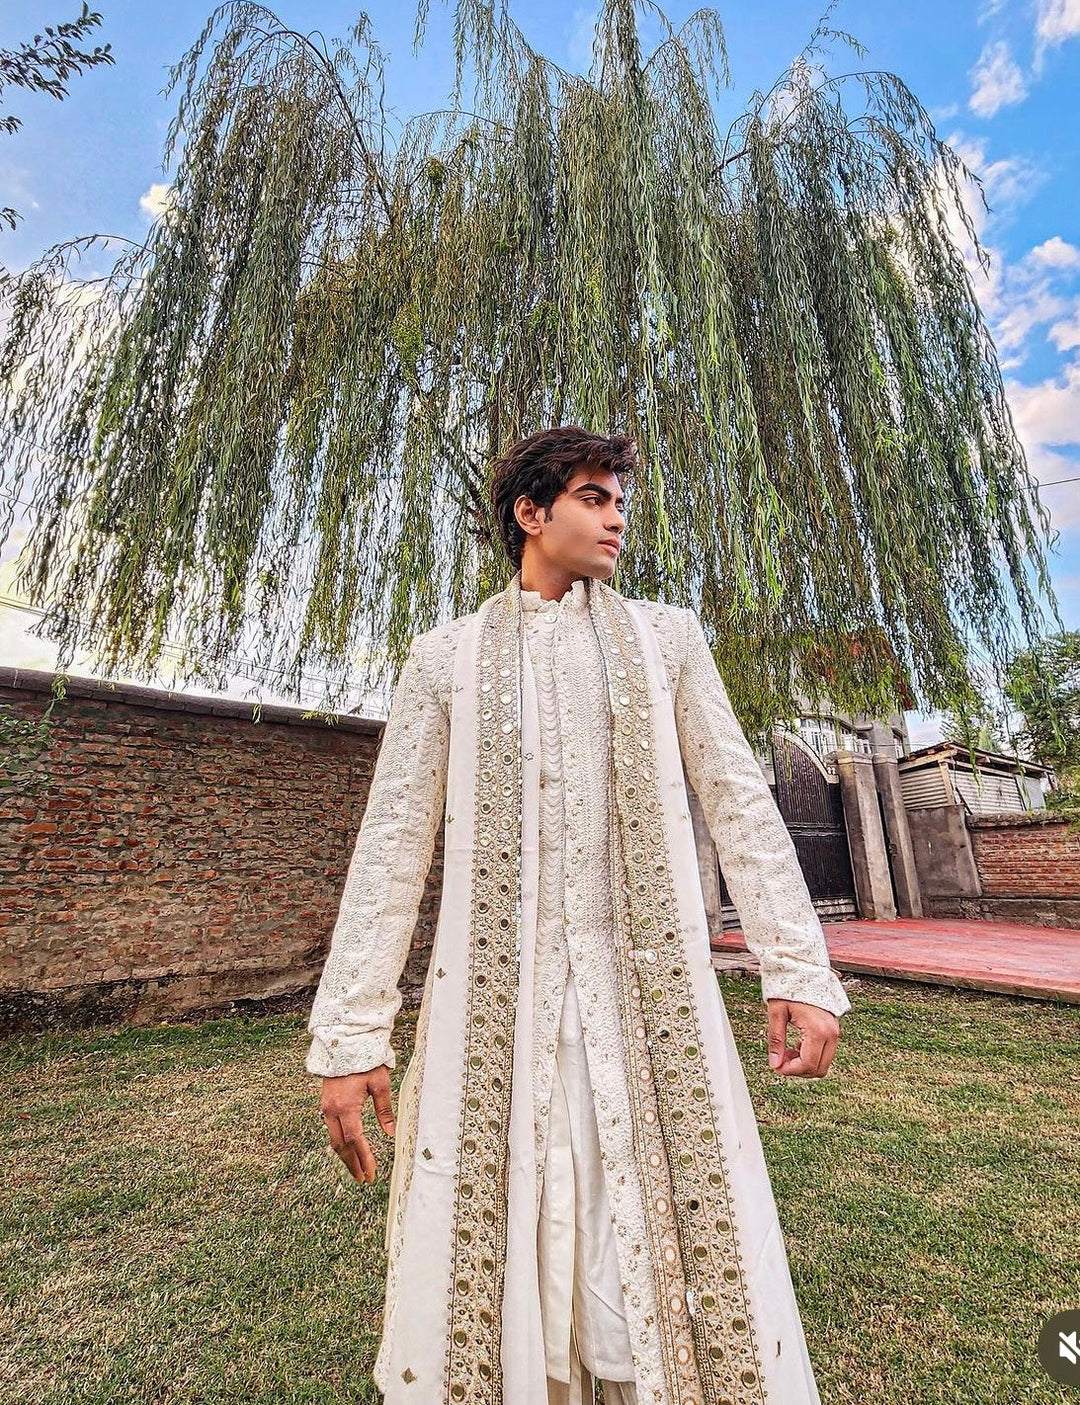 Amaan (@soboguys) in our Rudra - Off White Chikankari Sherwani Jacket Set with Stole